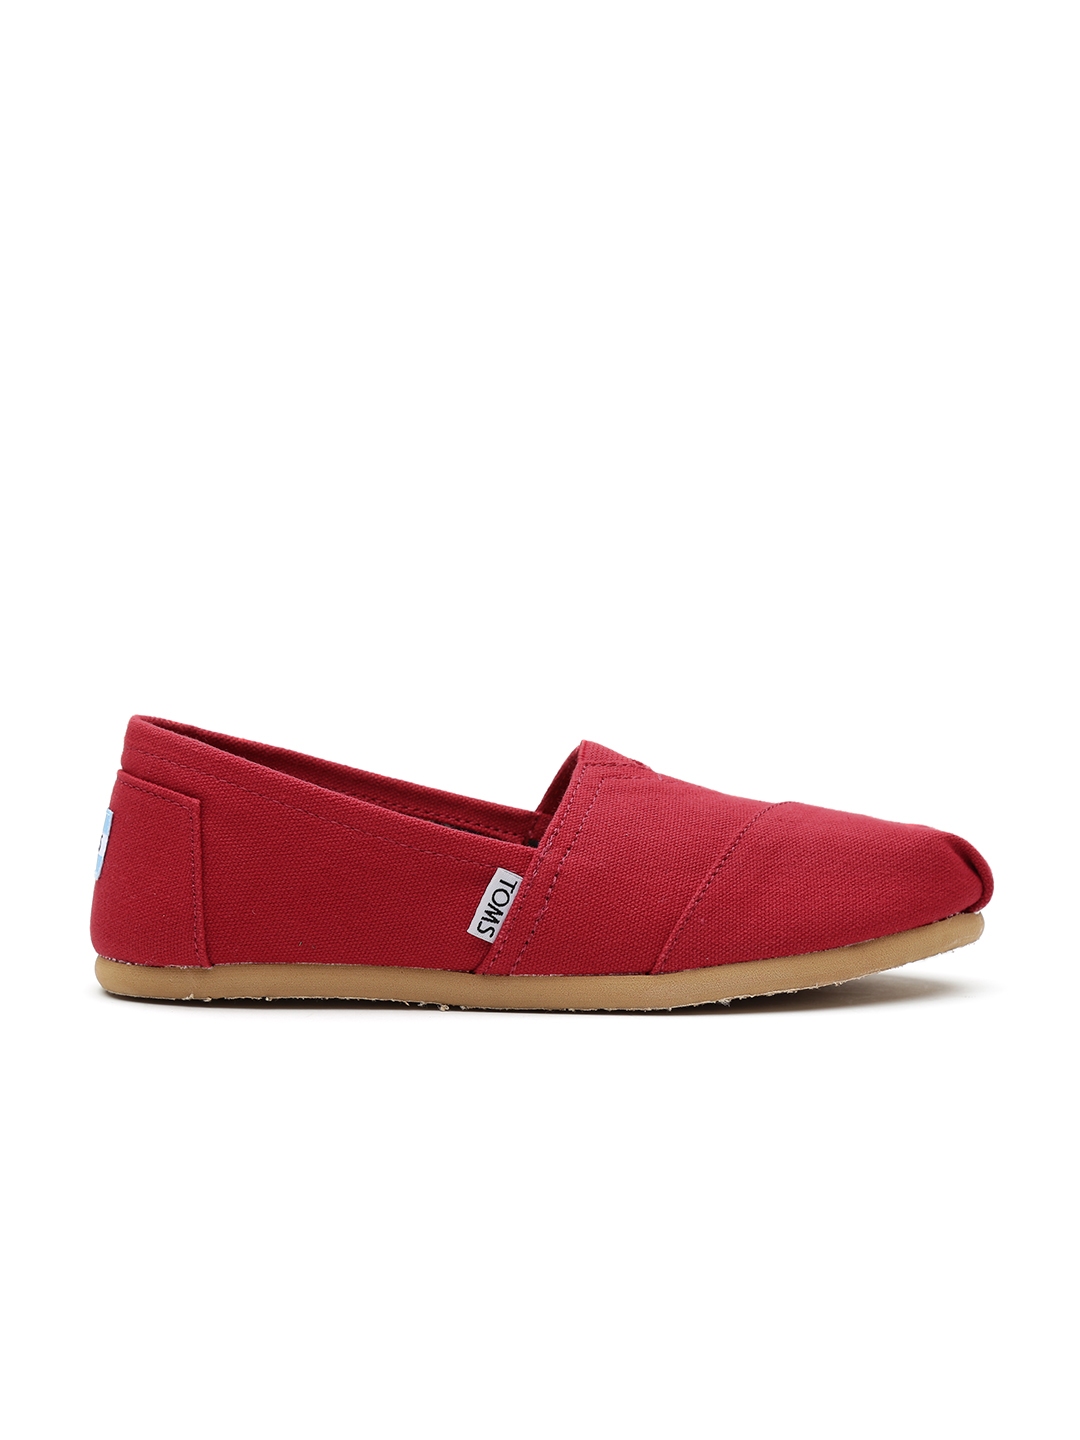 Buy TOMS Women Red Canvas Slip Ons - Casual Shoes for Women 1423639 ...